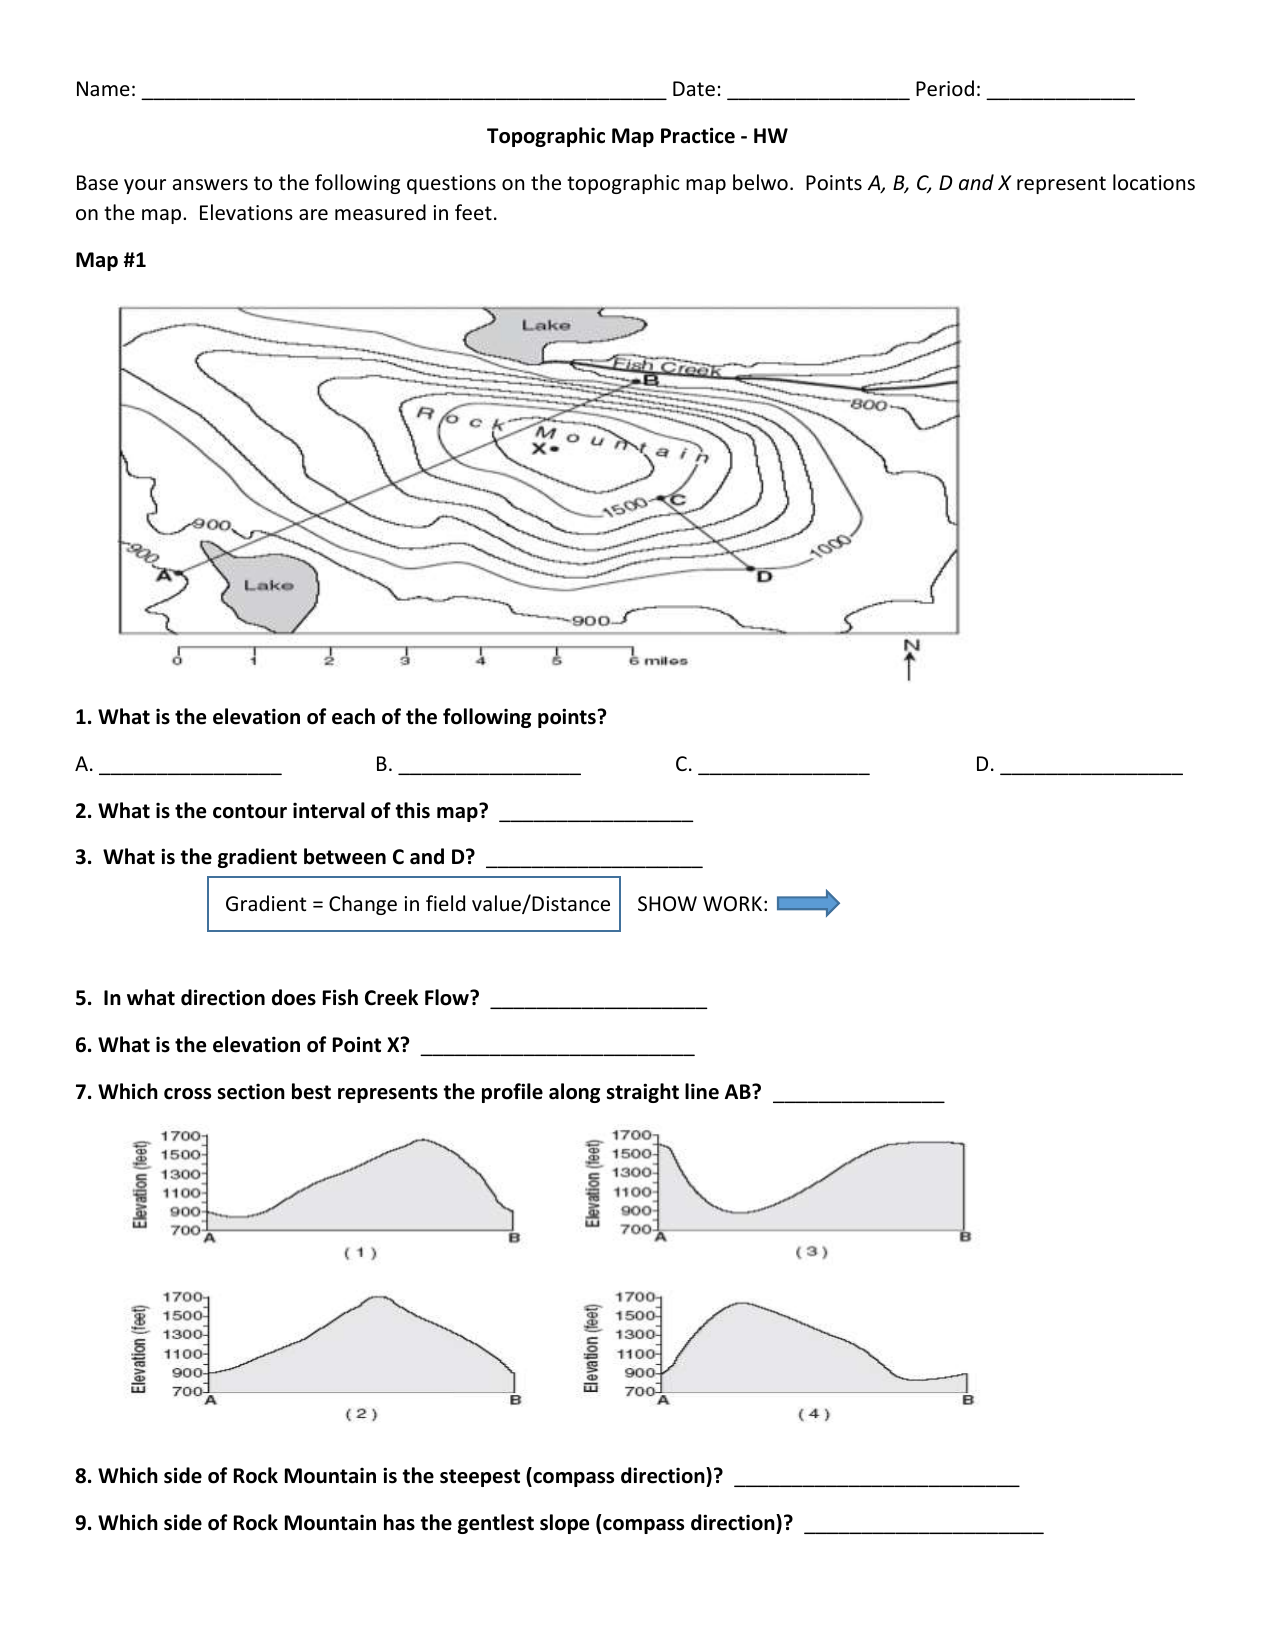 Topo HW Intended For Topographic Map Worksheet Answer Key